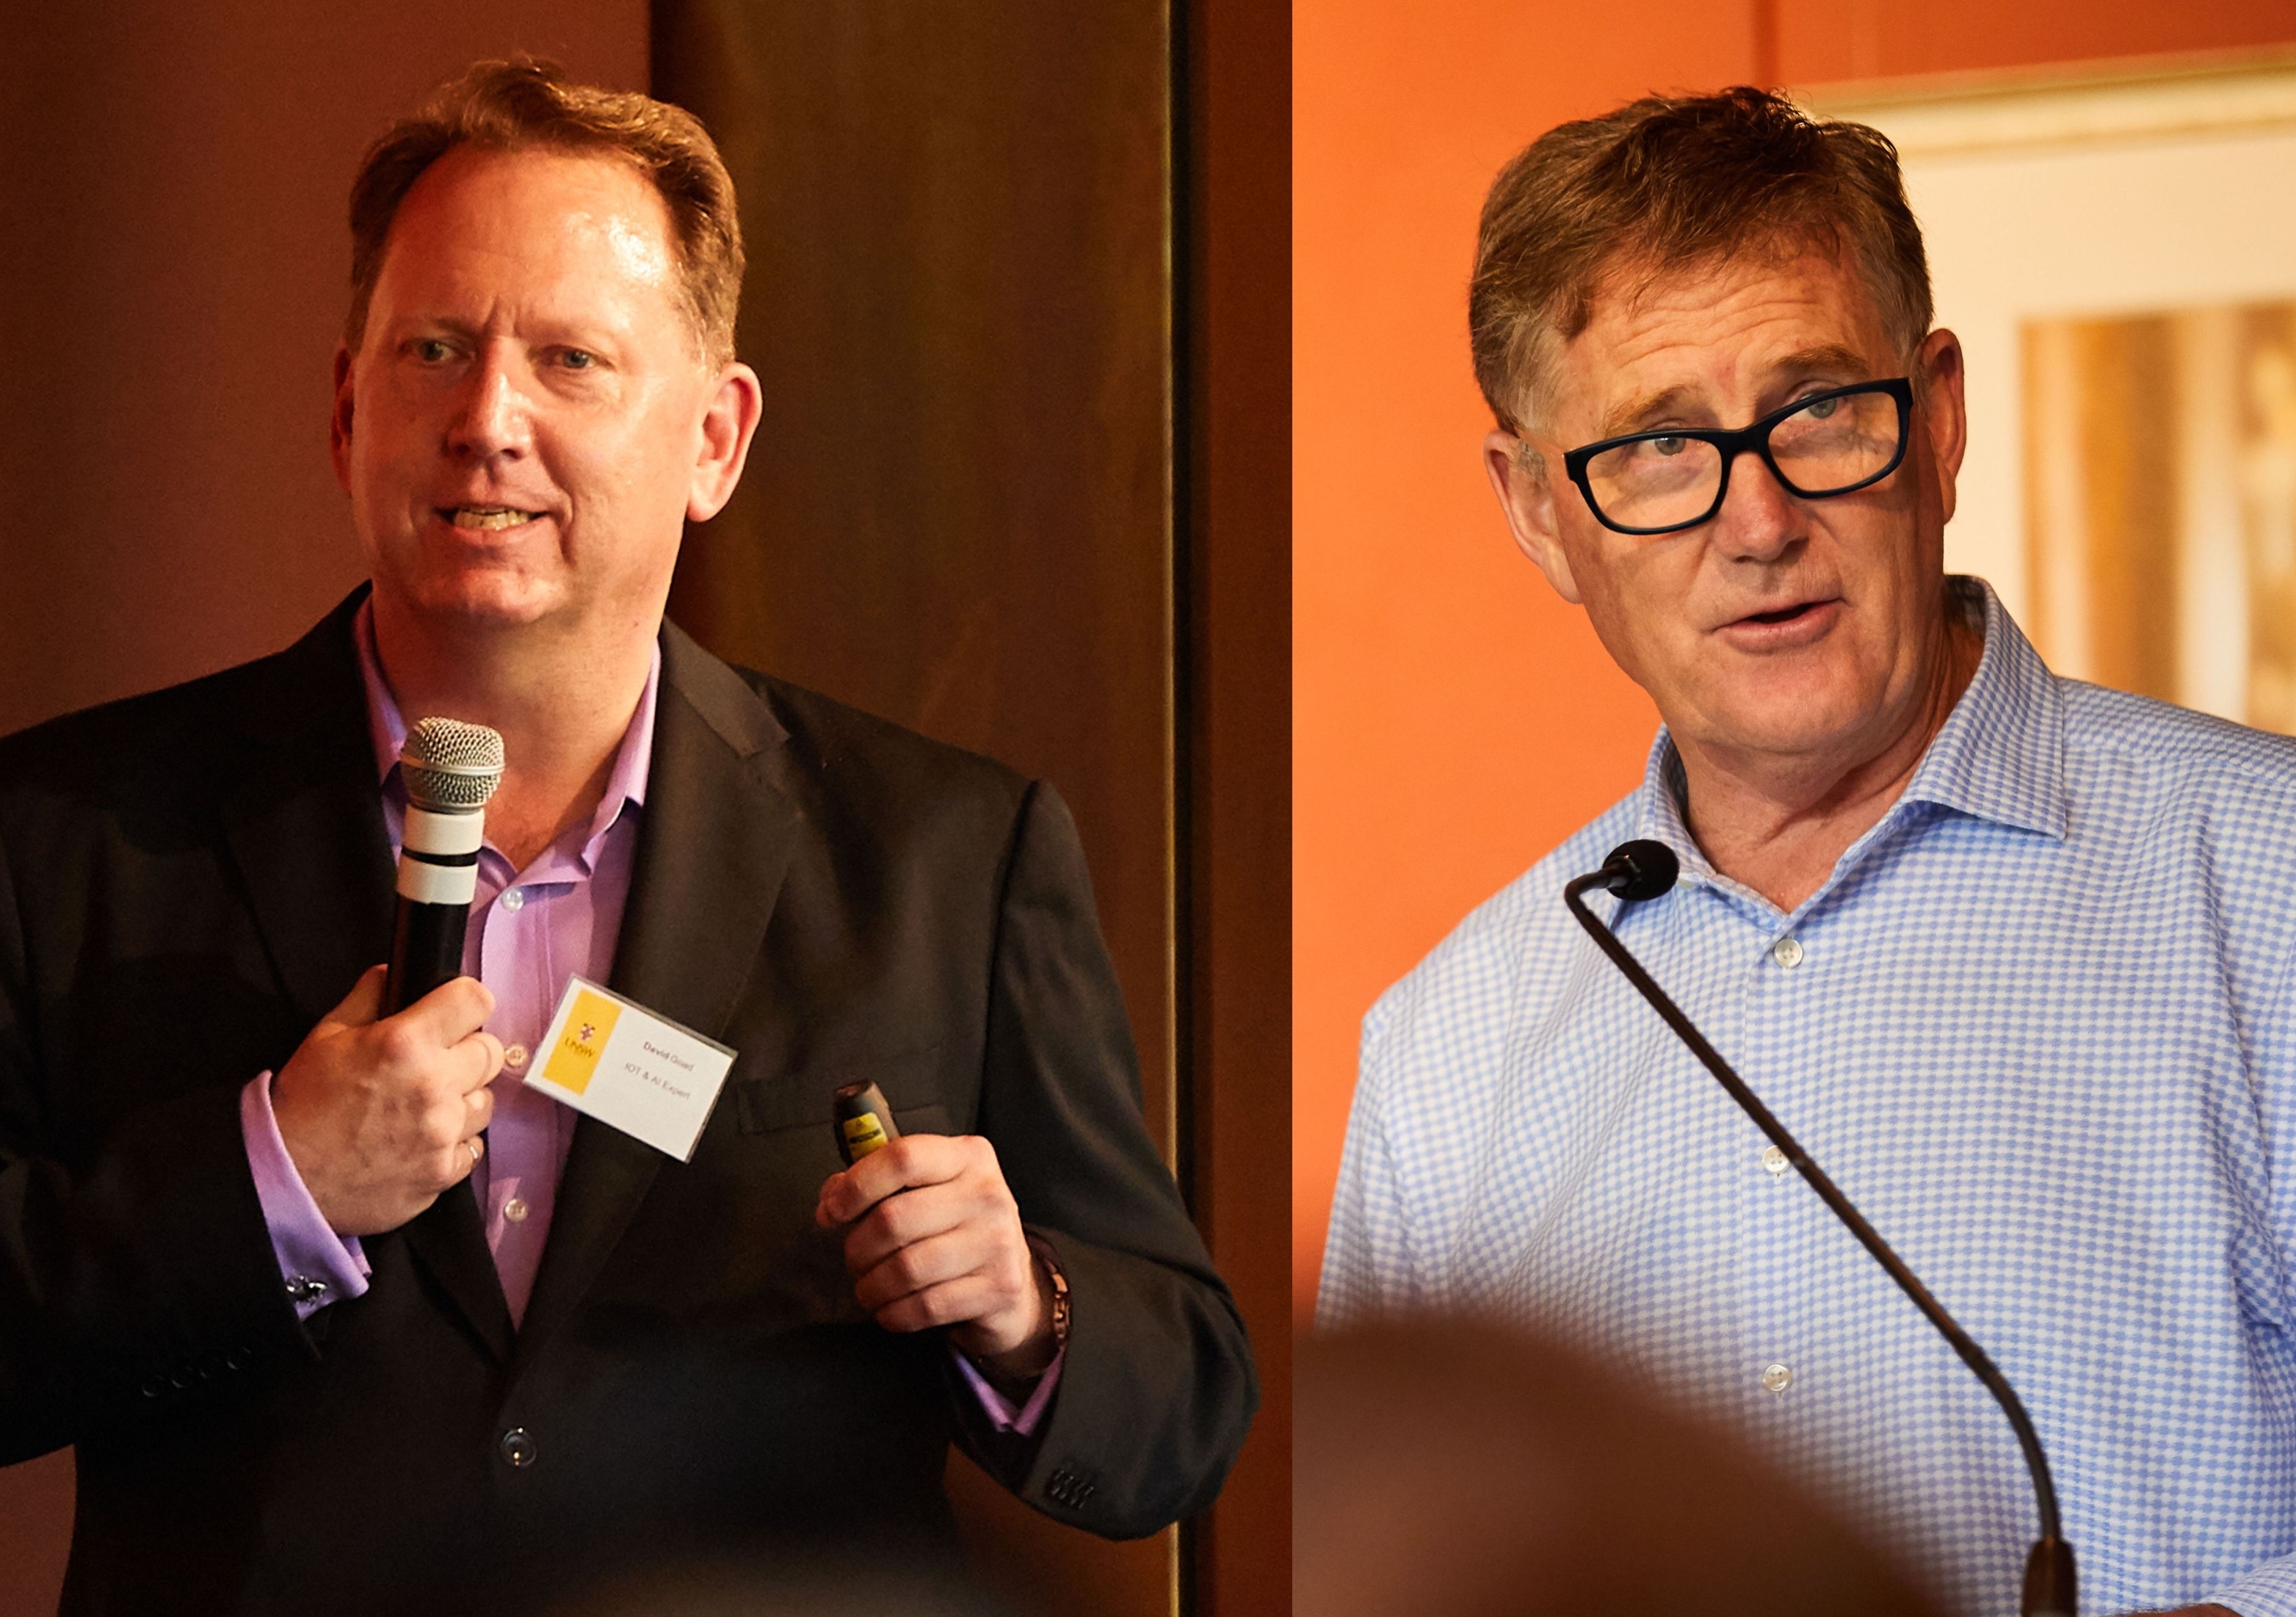 David Goad (left) and Stephen Porges (right) at the UNSW Business Innovation Conference 2019.